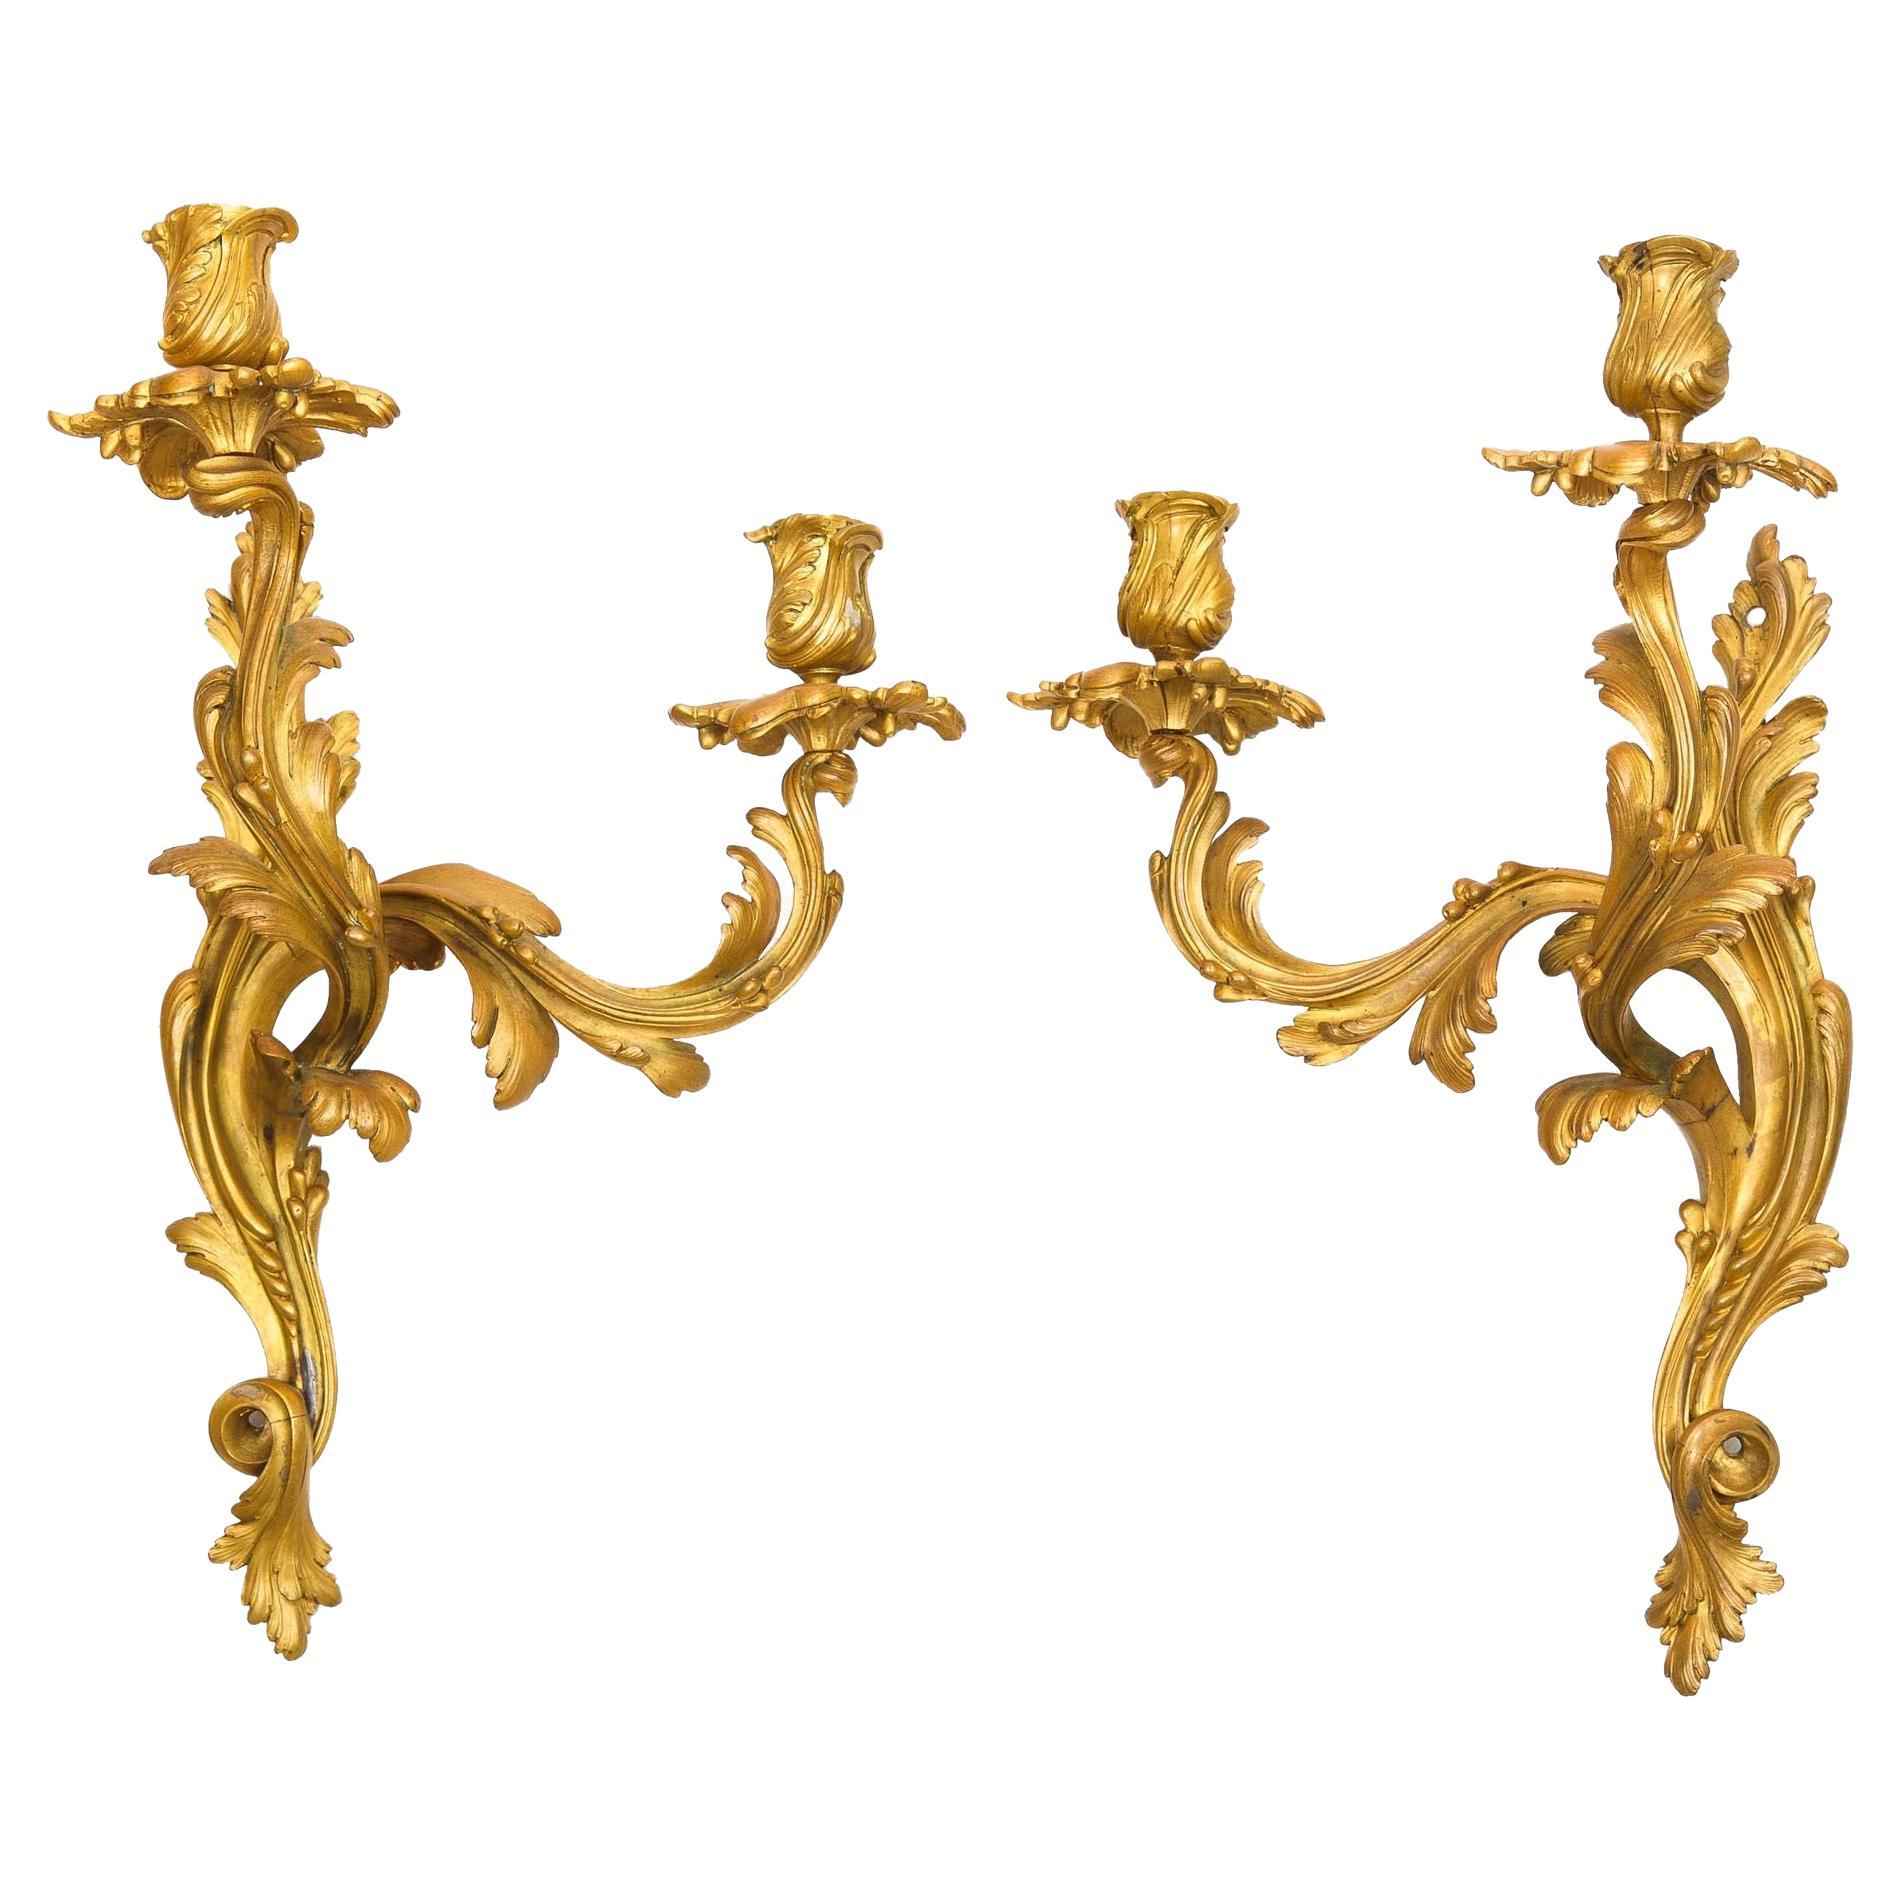 19th Century Pair of French Antique Louis XV Sconce Candelabras